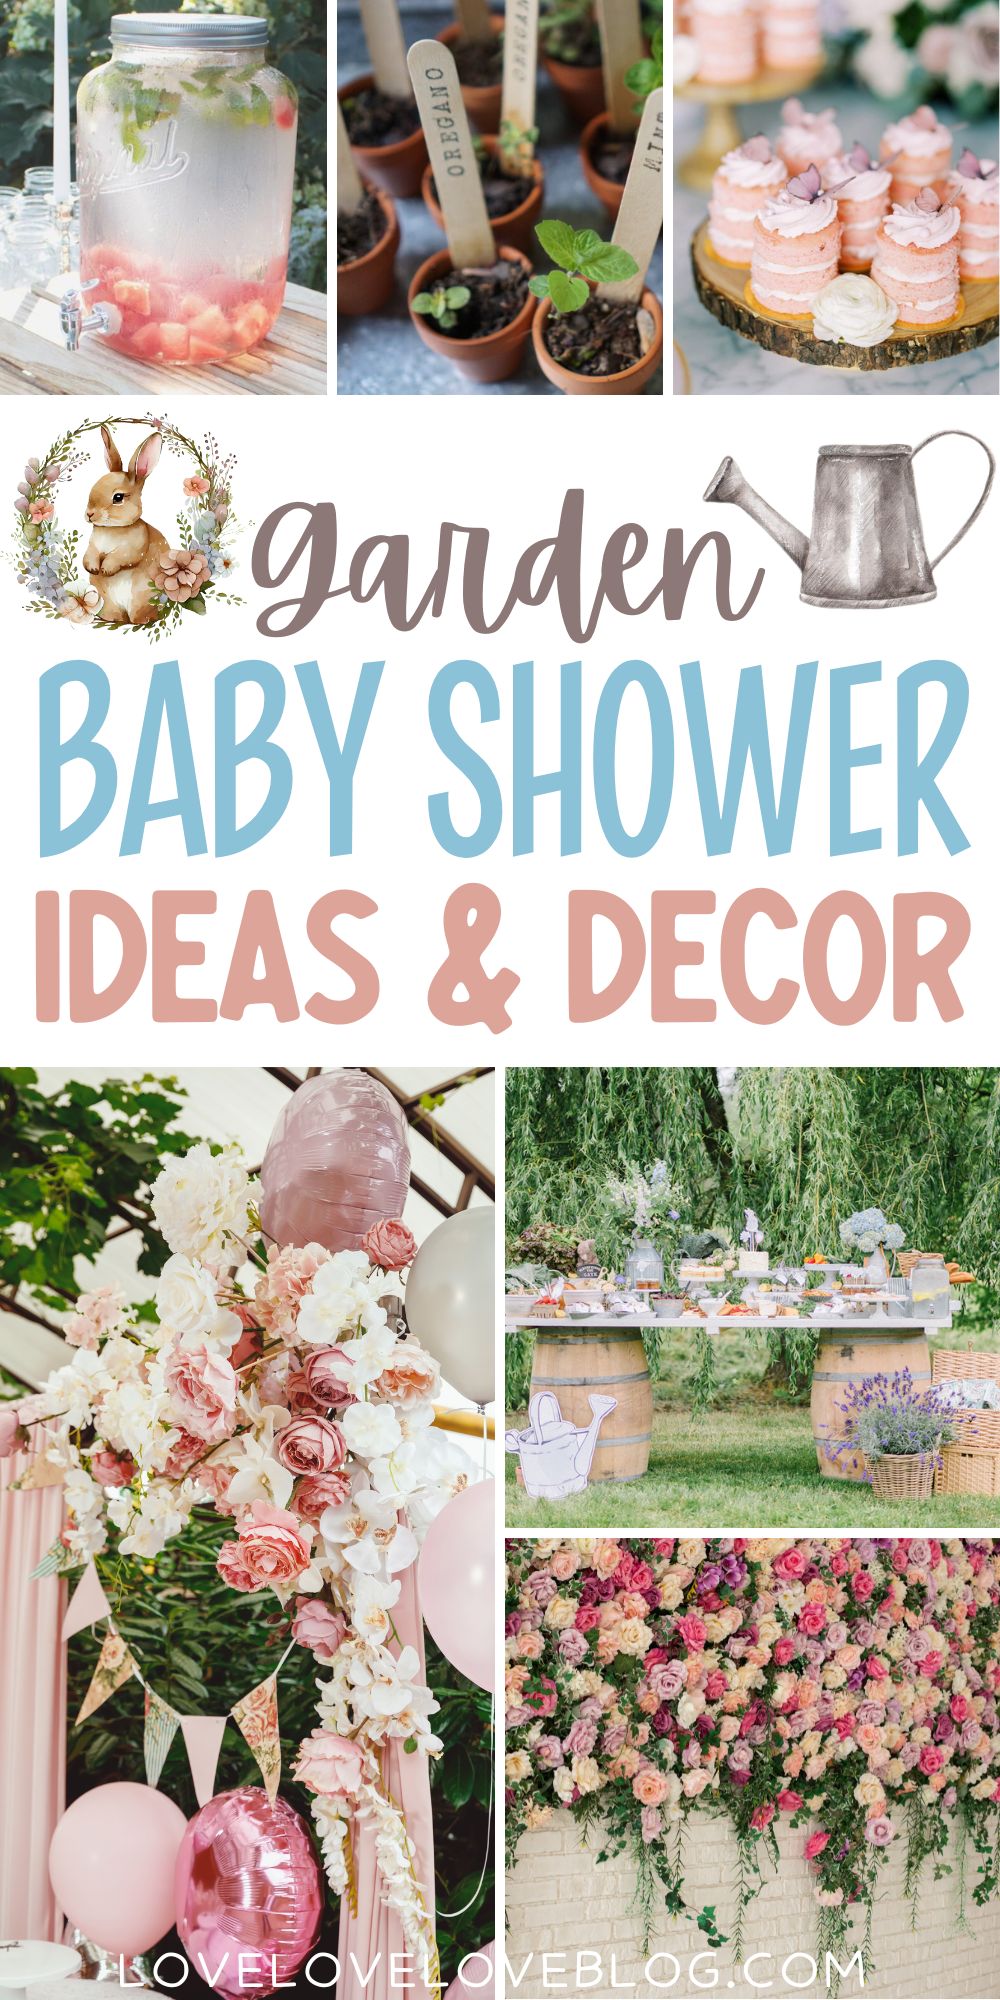 Pinterest graphic with text that reads "Garden Baby Shower Ideas and Decor" and a collage of party ideas.